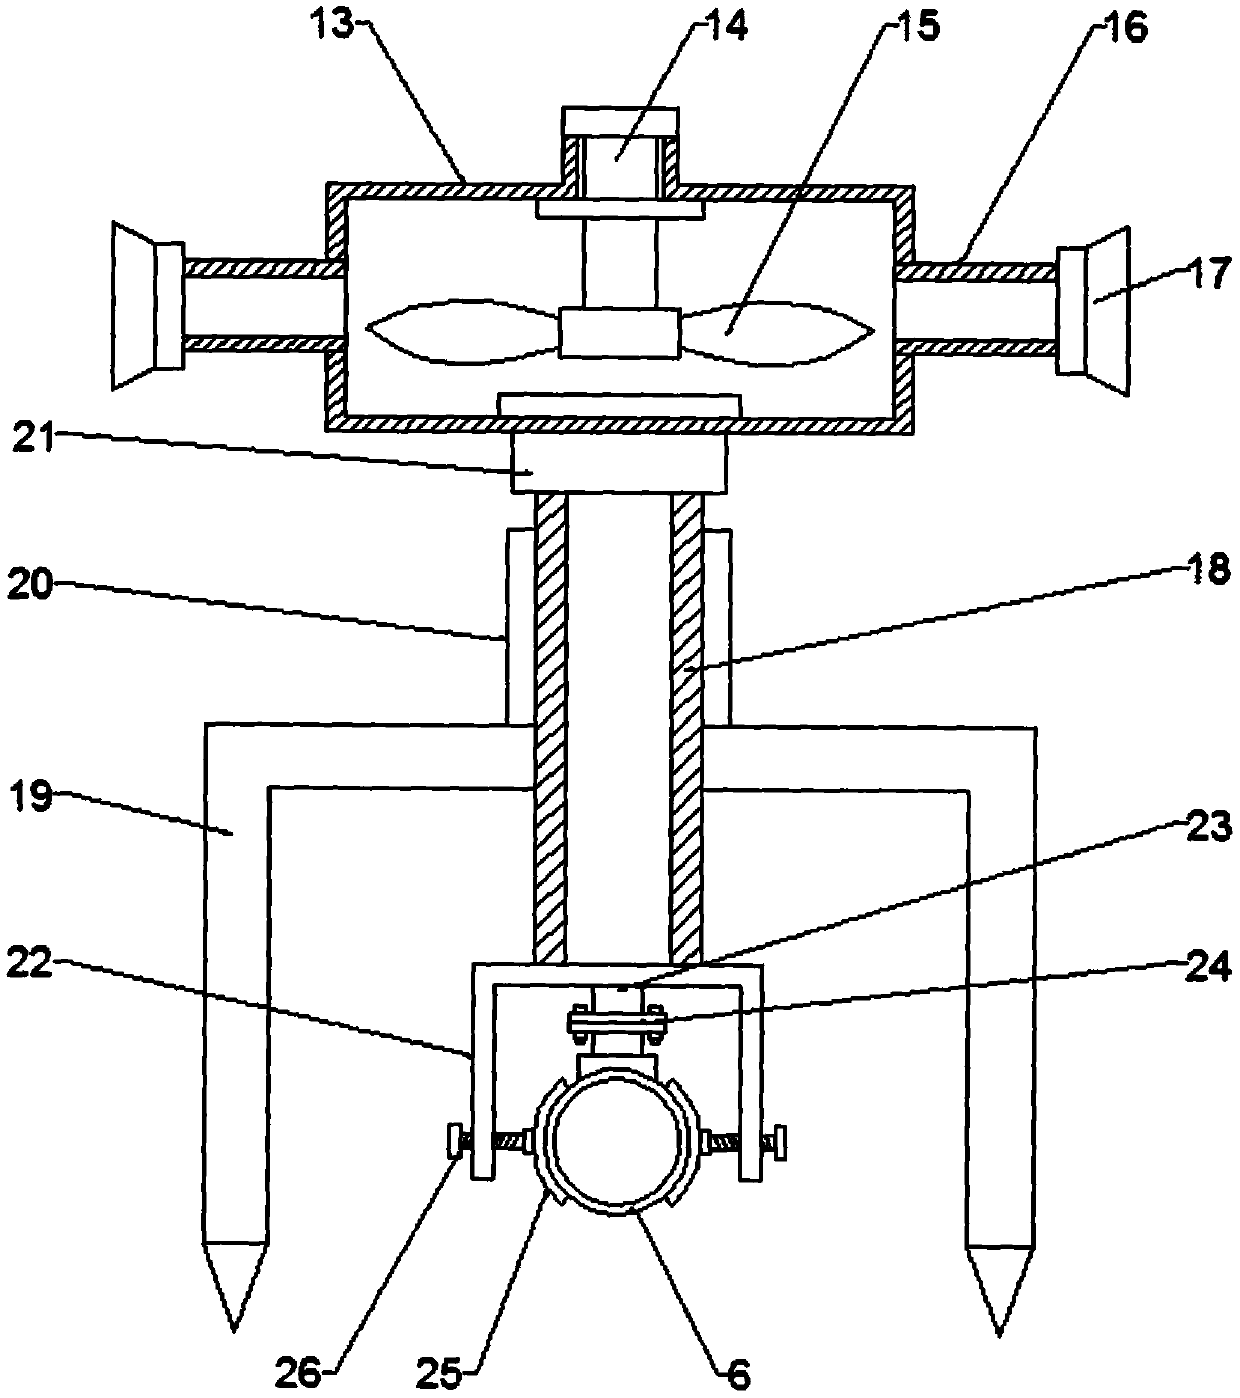 Agricultural irrigation system device